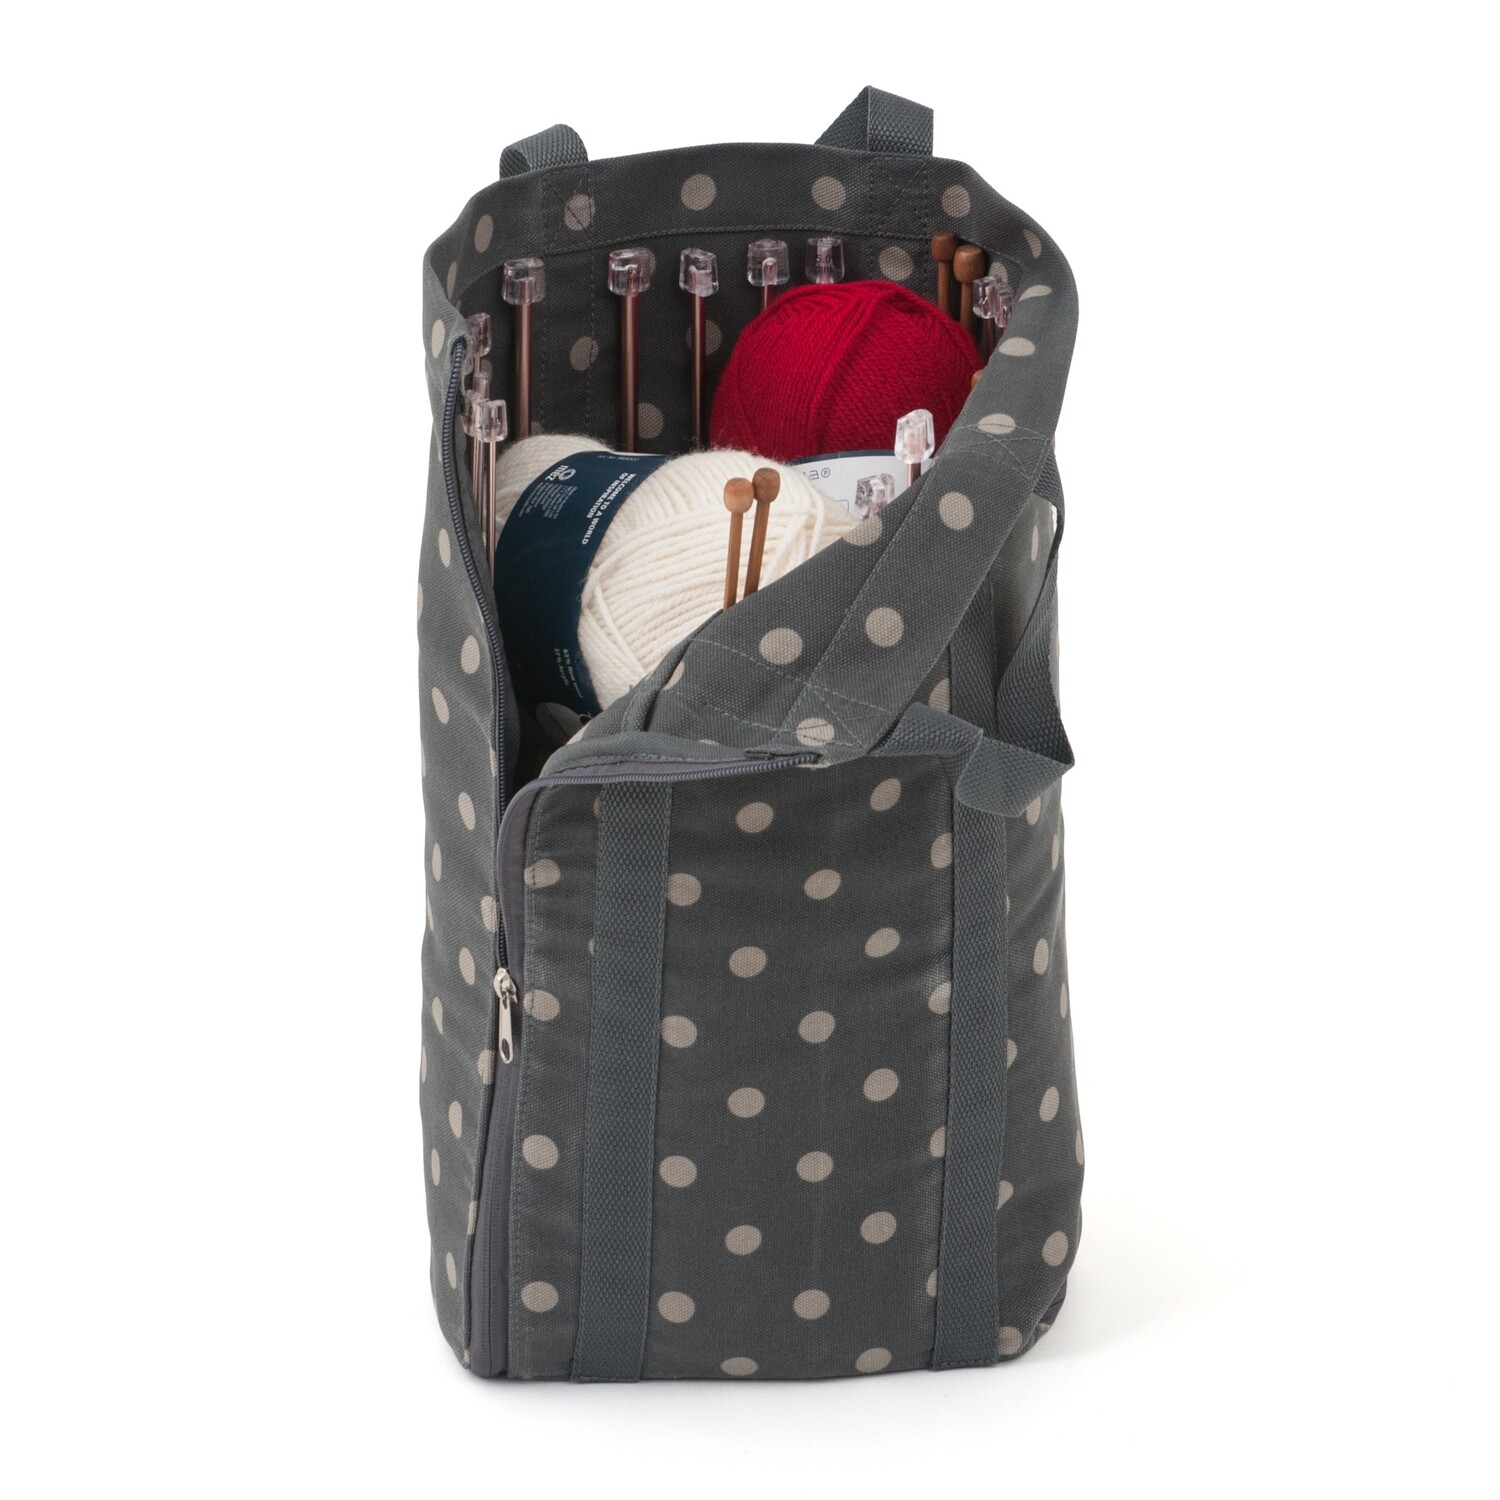 Knit Bag with Pin Storage - Charcoal Spot